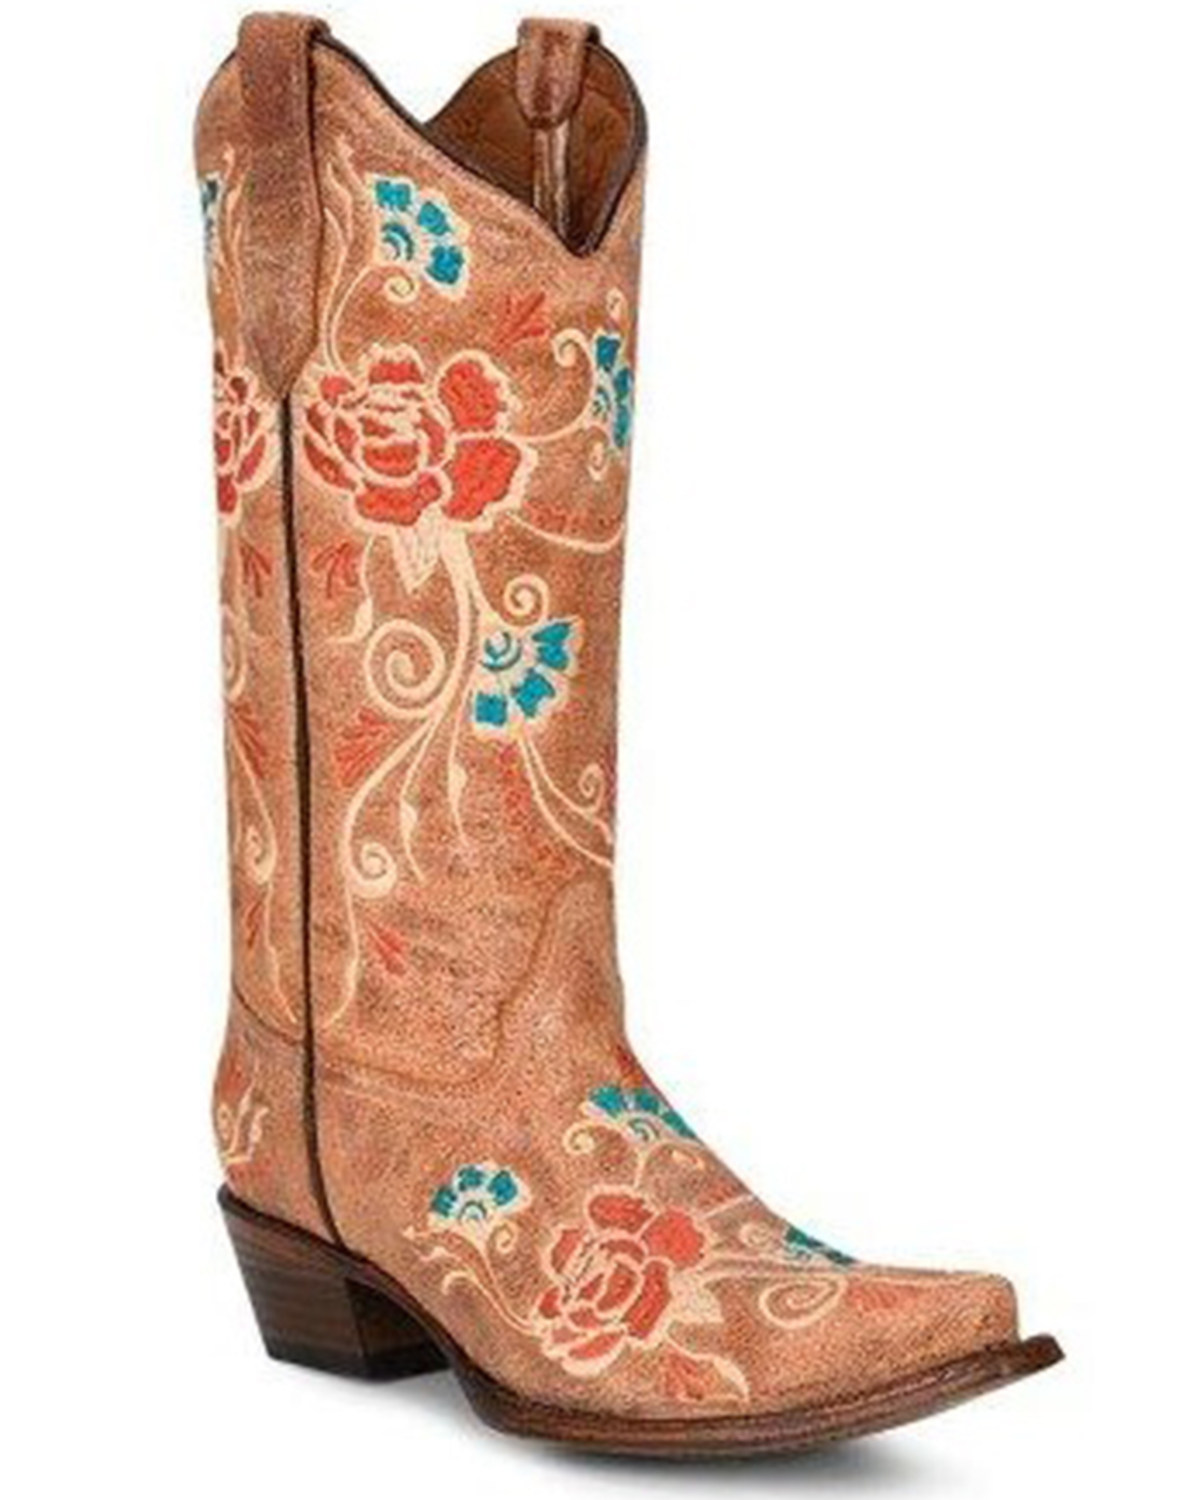 Corral Women's Embroidered Floral Western Boots - Snip Toe